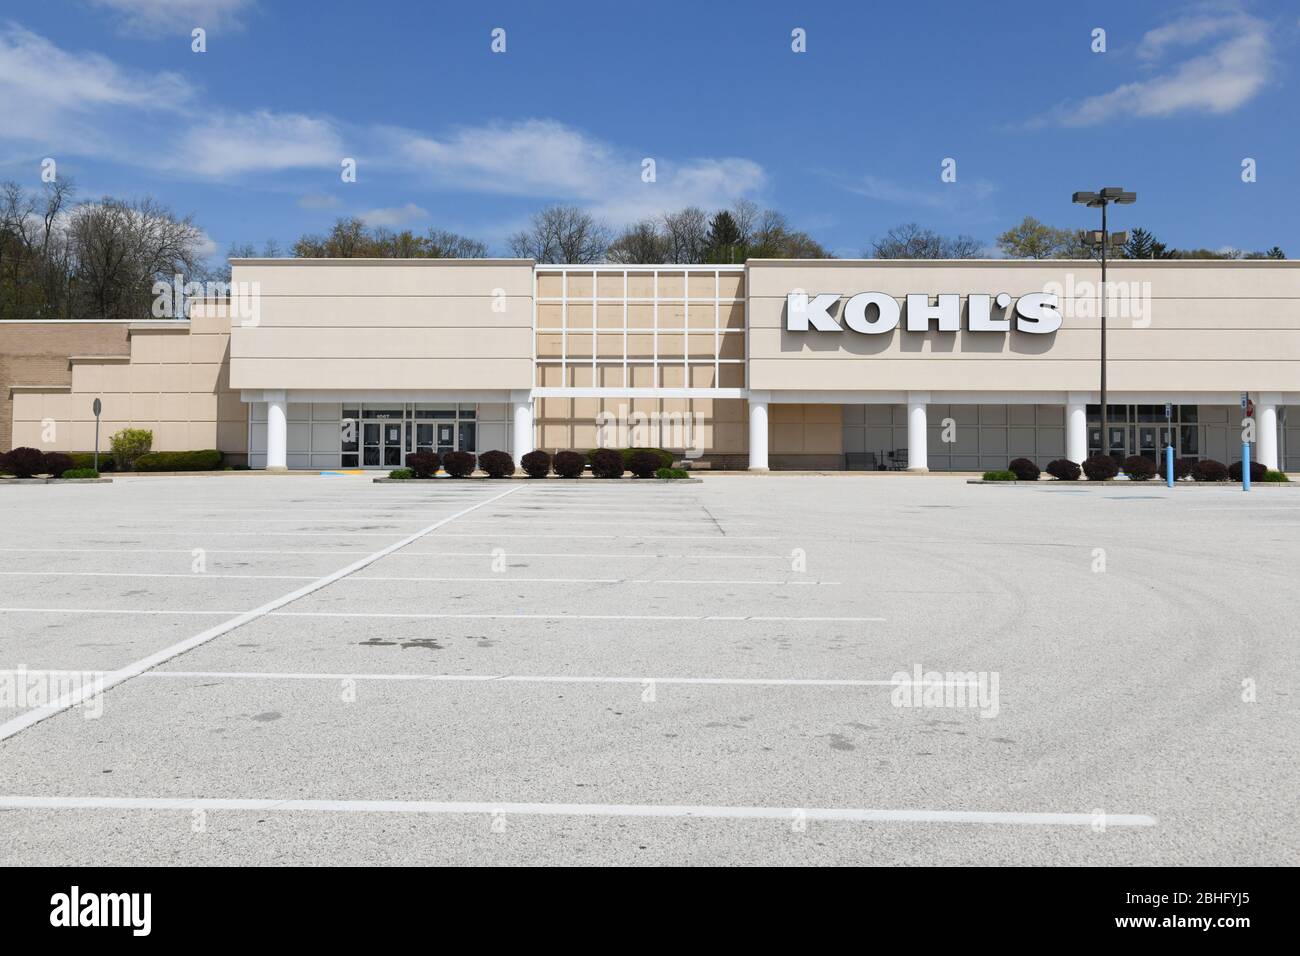 Kohls Department Store in danger of going out of business - close to bankruptcy or bankrupt - businesses harmed by Covid-19 depression / recession Stock Photo